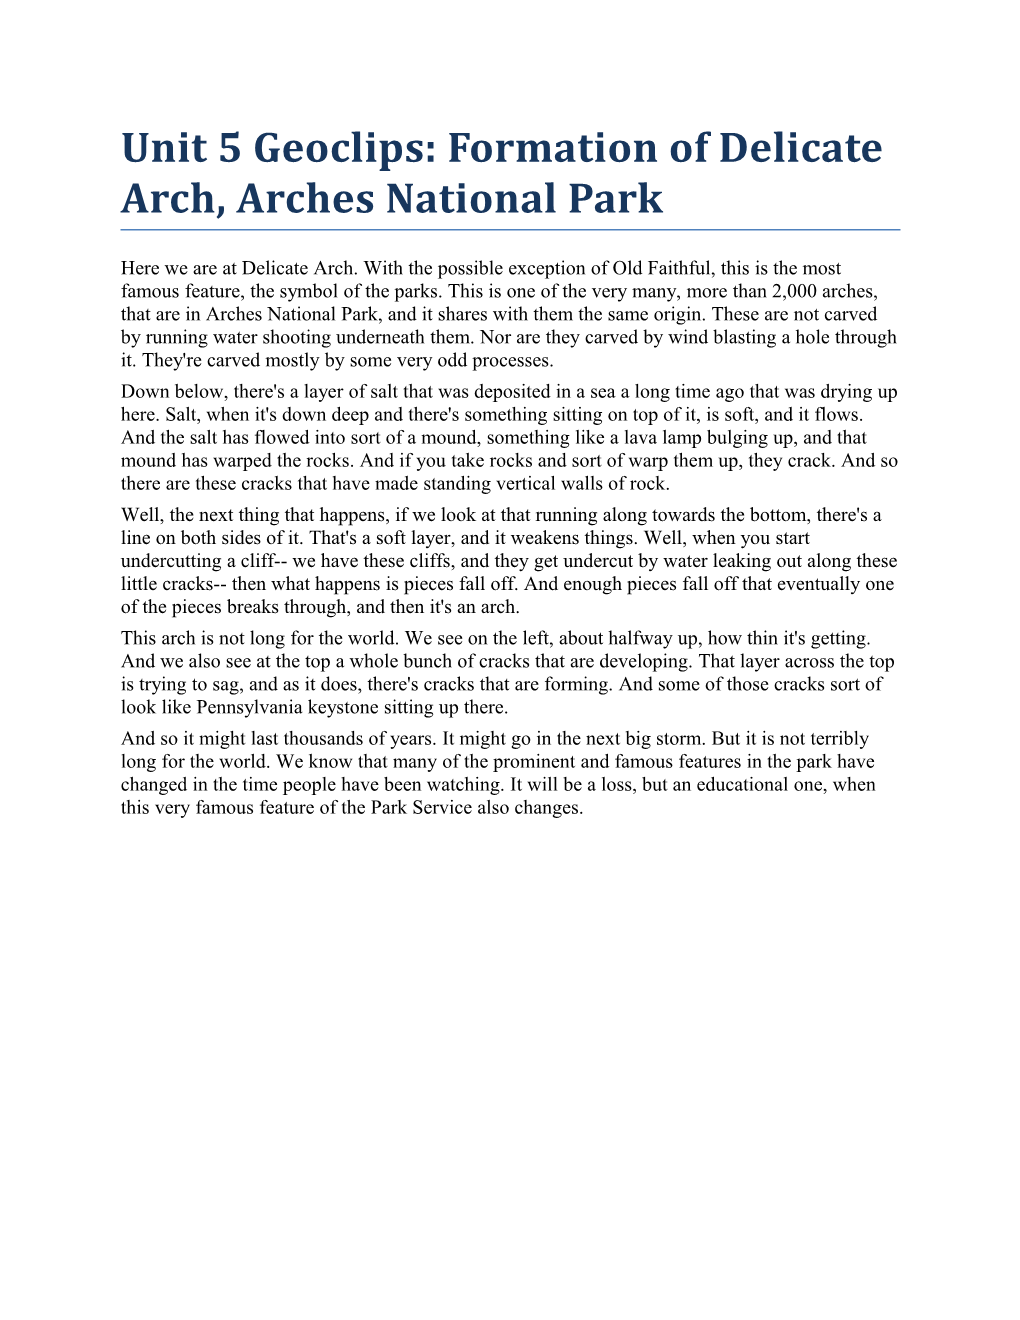 Unit 5Geoclips: Formation of Delicate Arch, Arches National Park